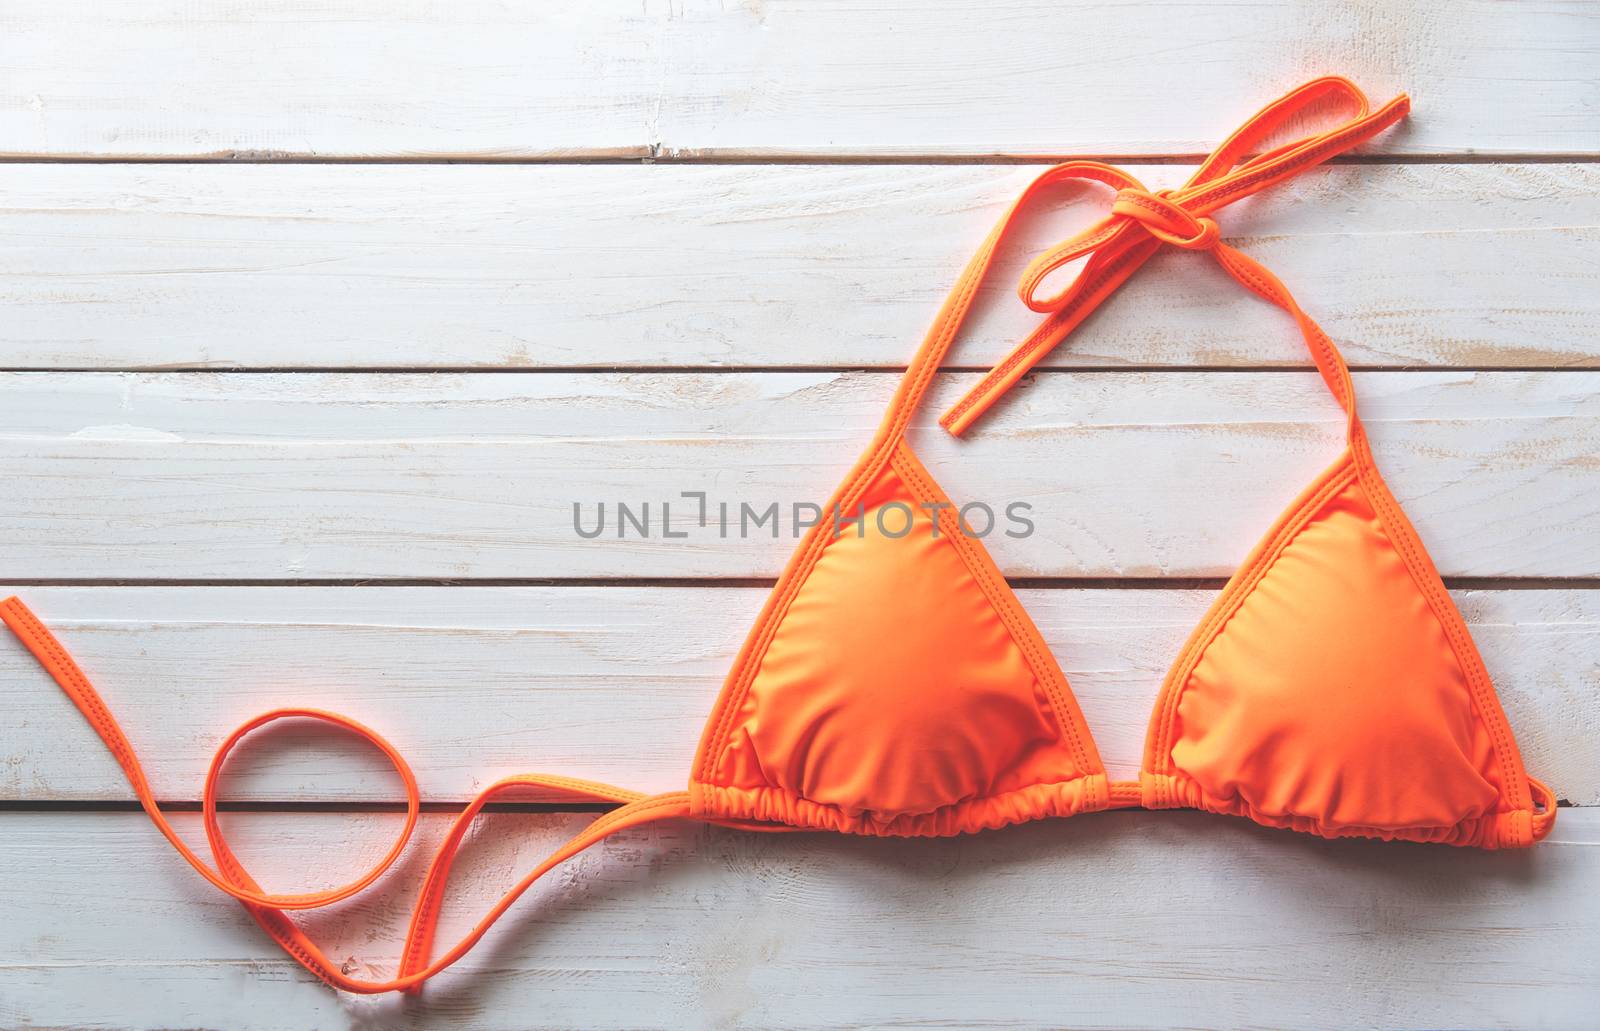  orange bikini rests on a wooden floor -summer and travel cocept by photobyphotoboy